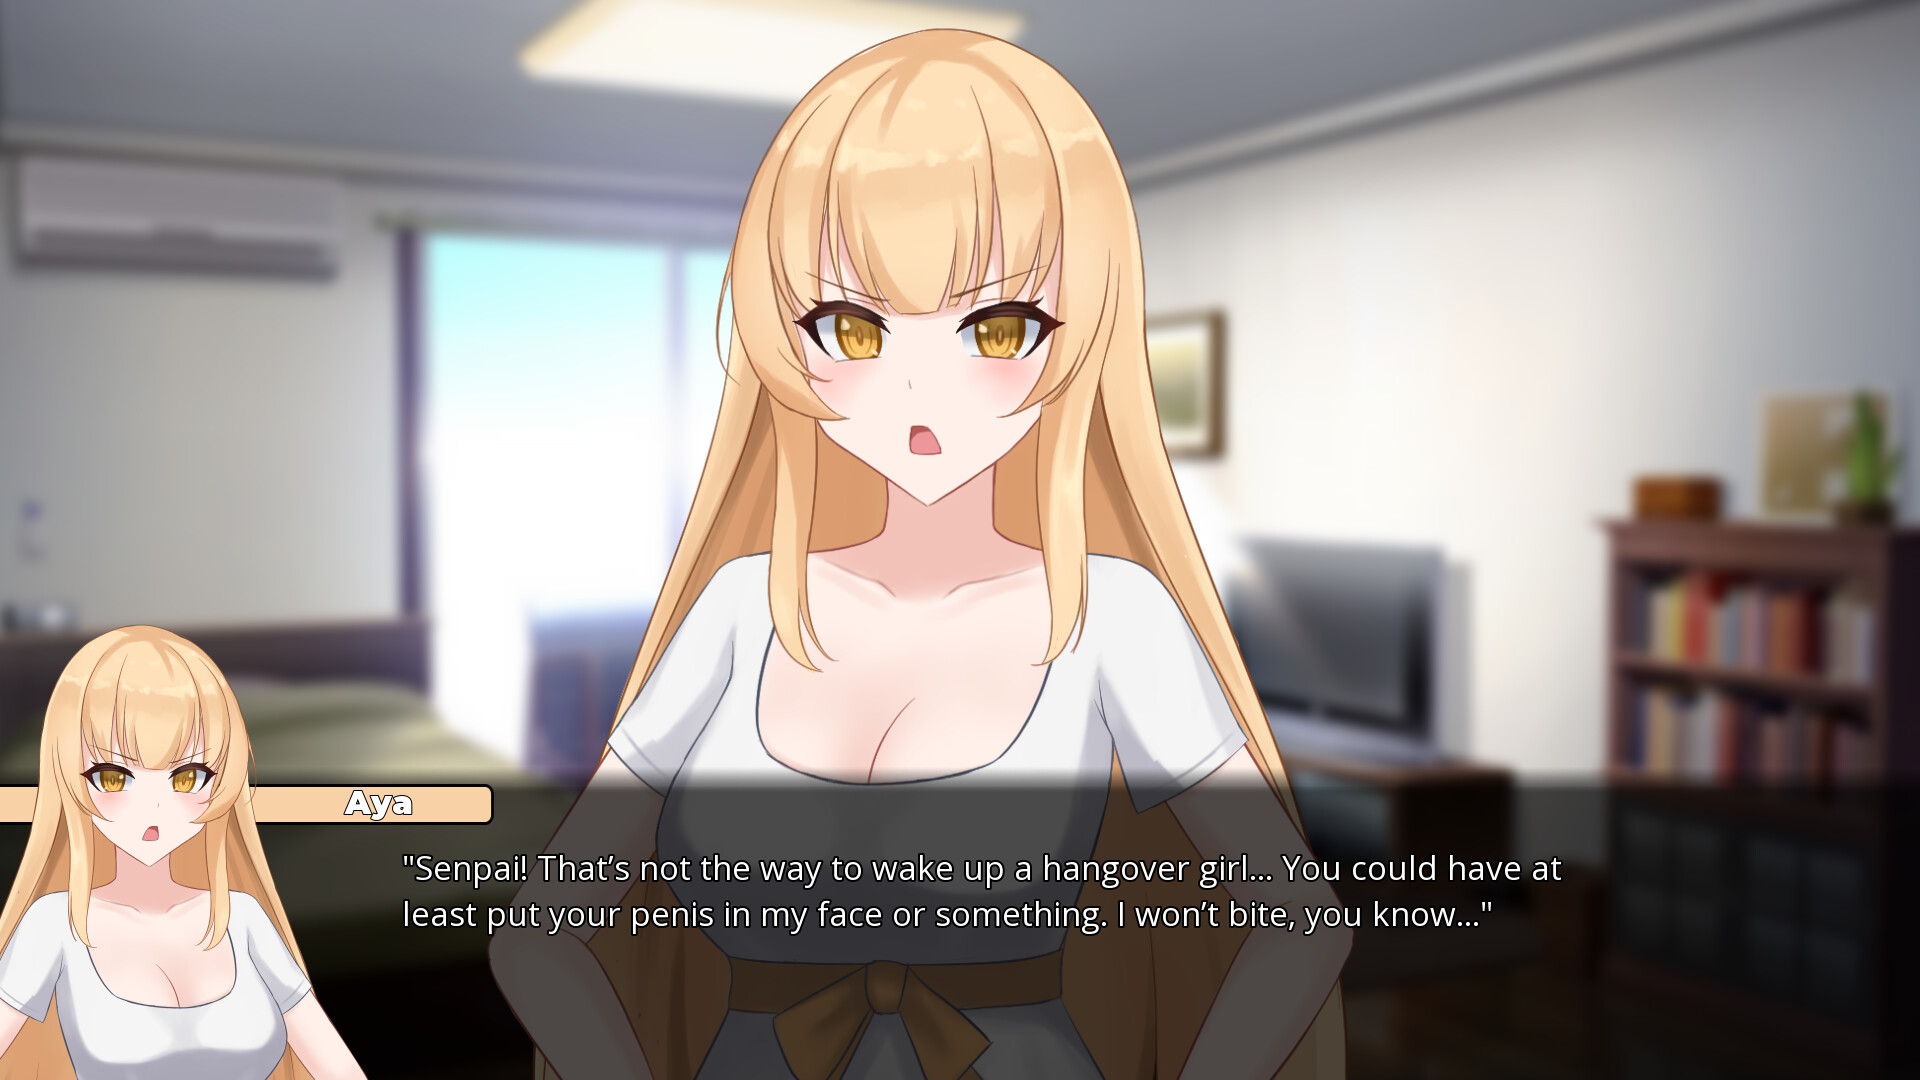 Cherry on X: Game: A Promise Best Left Unkept t.coKkaoKxMbik  Prompted into action by the promise he made to his girlfriend a year ago,  Harry finally made a huge ... #visualnovel #vn